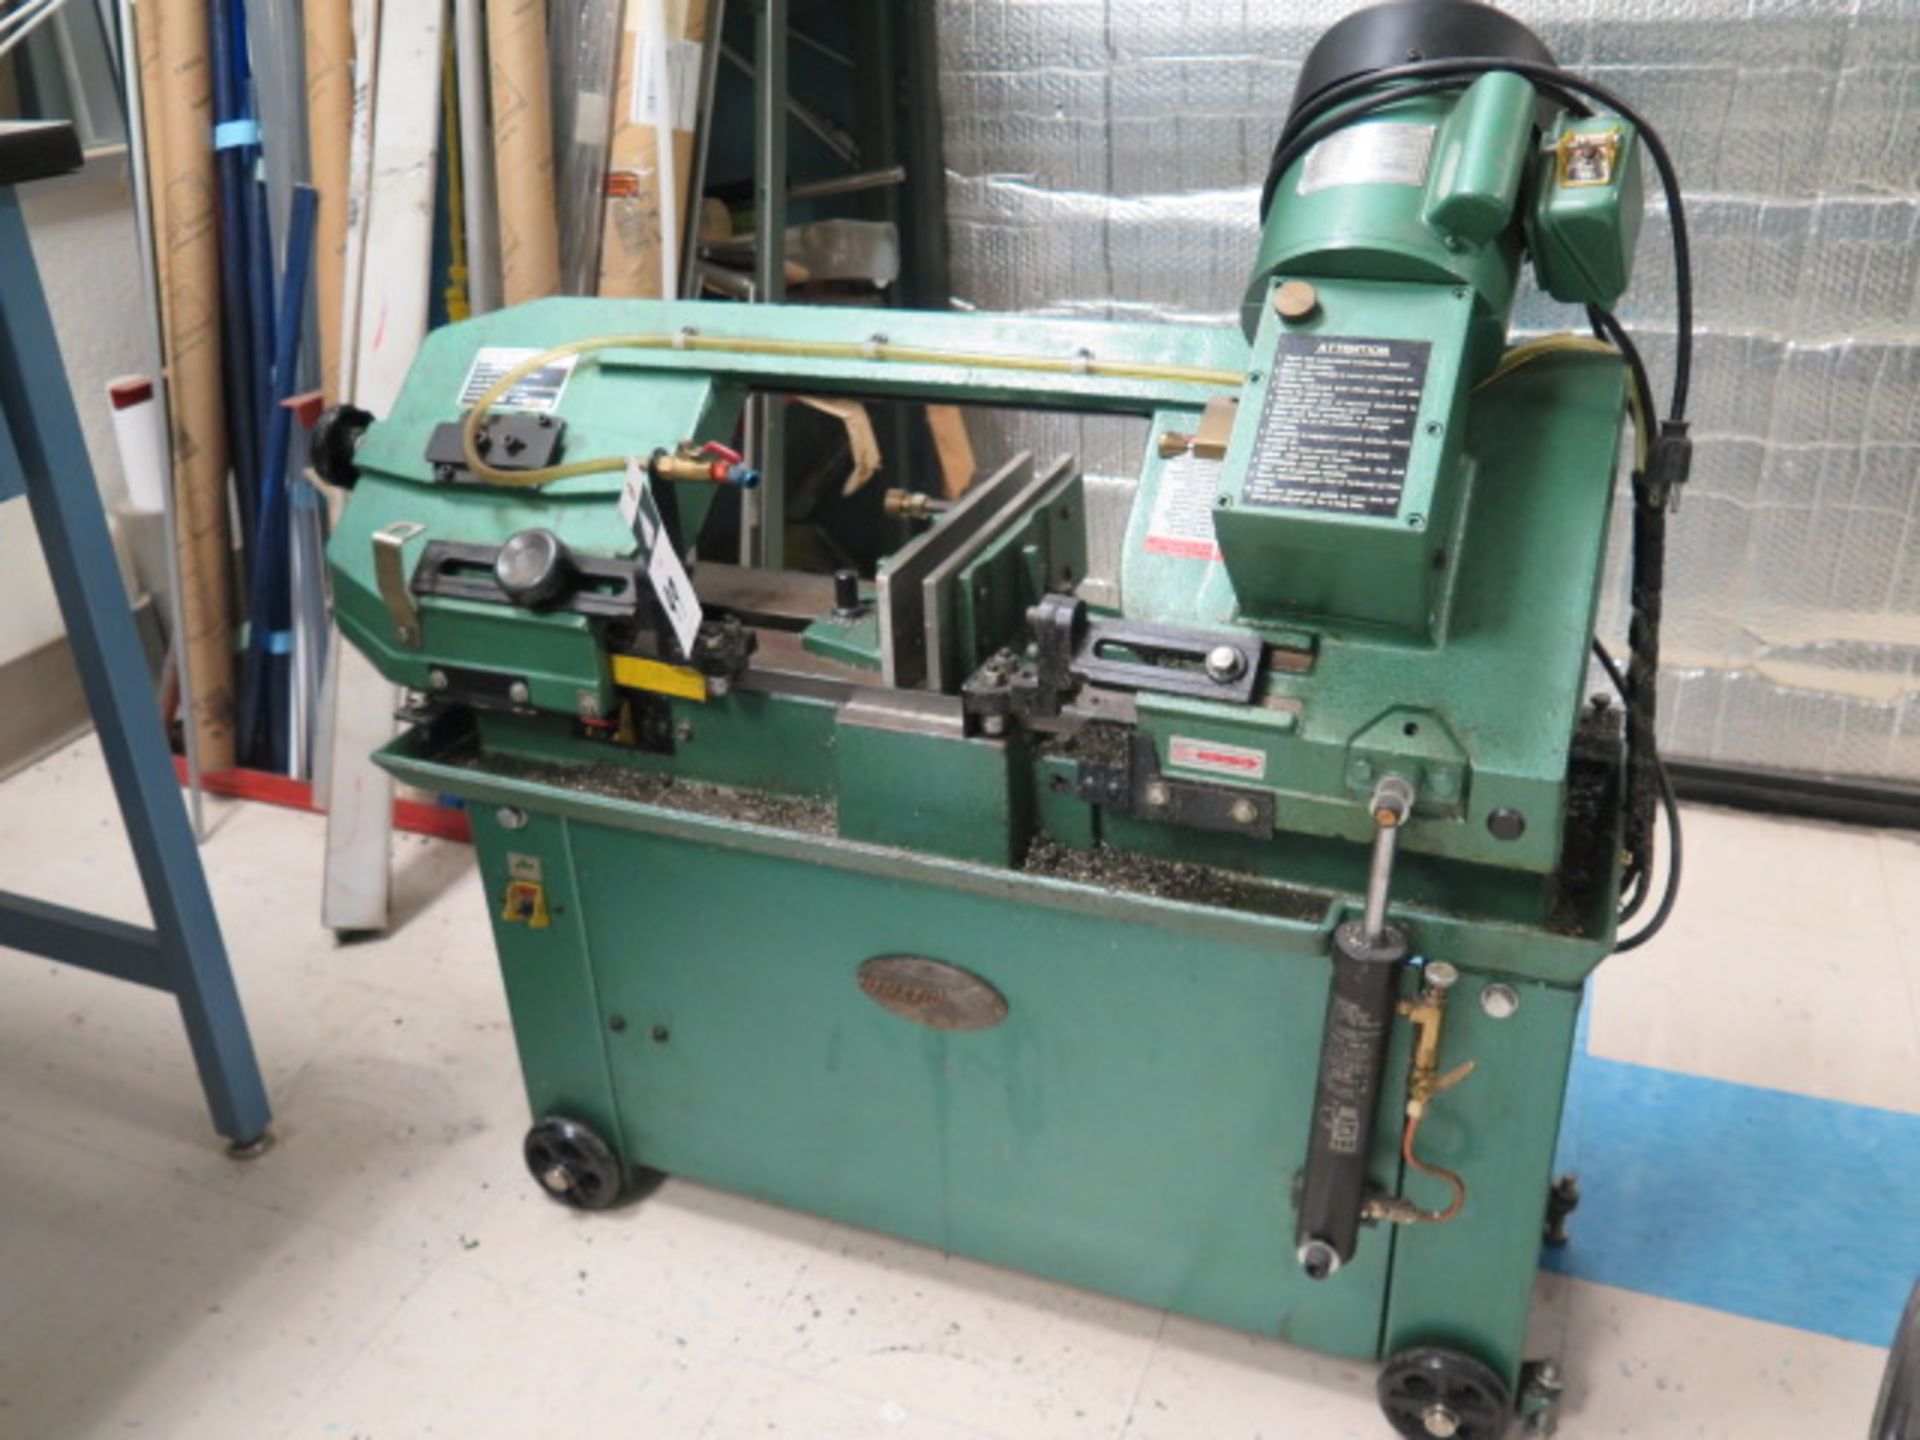 Grizzly mdl. G4043 6 ½” Horizontal Band Saw s/n 7288 w/ Manual Clamping, Coolant (SOLD AS-IS - NO WA - Image 2 of 8